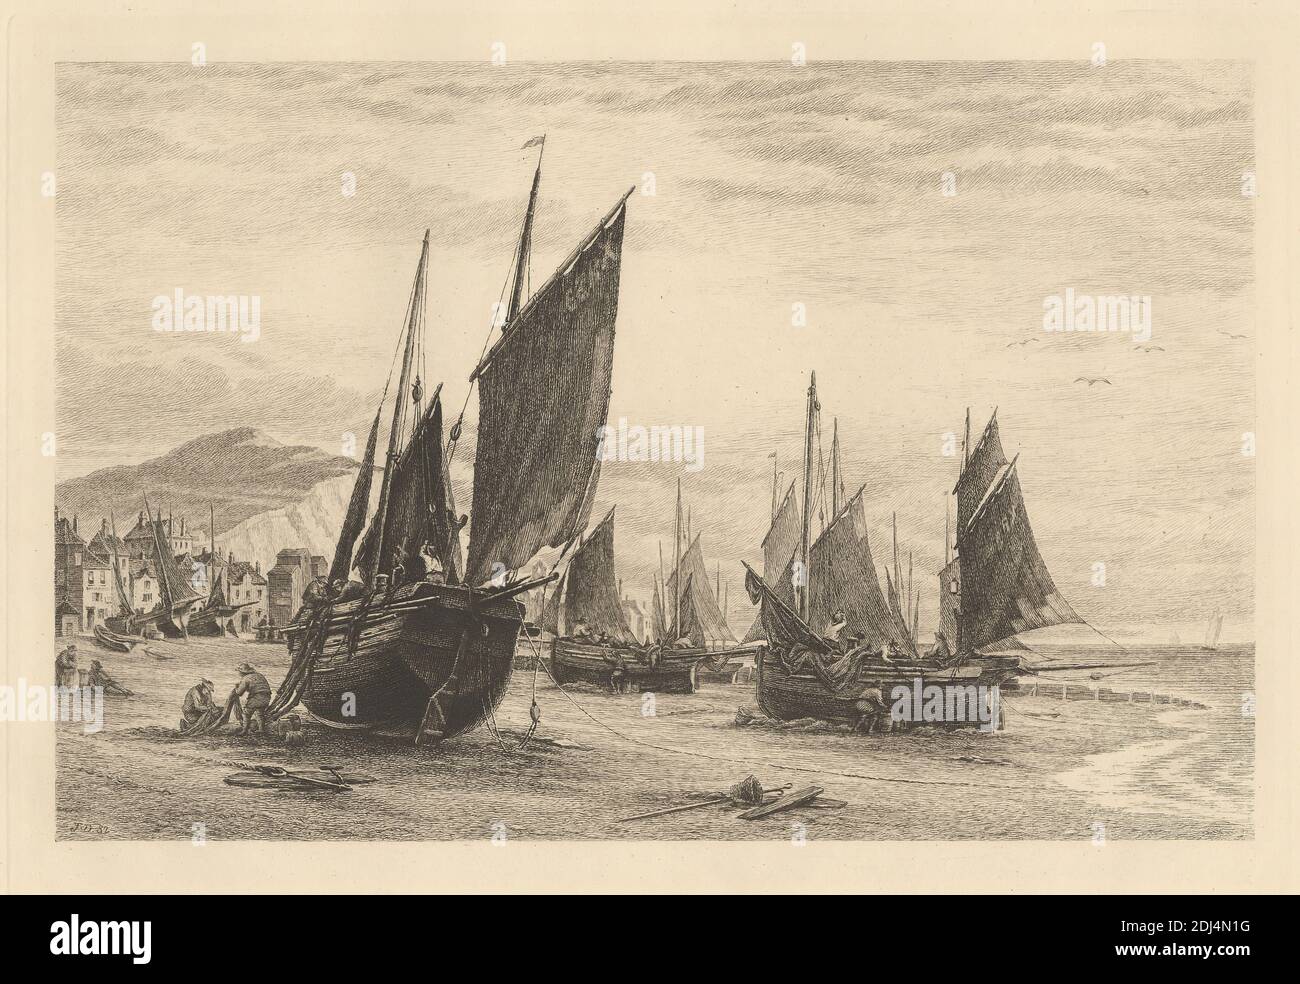 Fishing Boats at Hastings, Print made by James Dobie, 1849–1911, British, 1882, Etching on moderately thick, moderately textured, beige laid paper, Sheet: 12 3/8 x 16 11/16 inches (31.4 x 42.4 cm), Plate: 7 9/16 x 10 13/16 inches (19.2 x 27.5 cm), and Image: 6 9/16 x 10 1/16 inches (16.7 x 25.6 cm), barrels (containers), beach, beams (structural elements), boats, buildings, channel (water body component), cityscape, coast, fishermen (people), fishing, genre subject, industry, labor, marine art, masts, men, mountains, pulleys, sailboats, sails, sea, seamen, shore (landform), tools, town Stock Photo